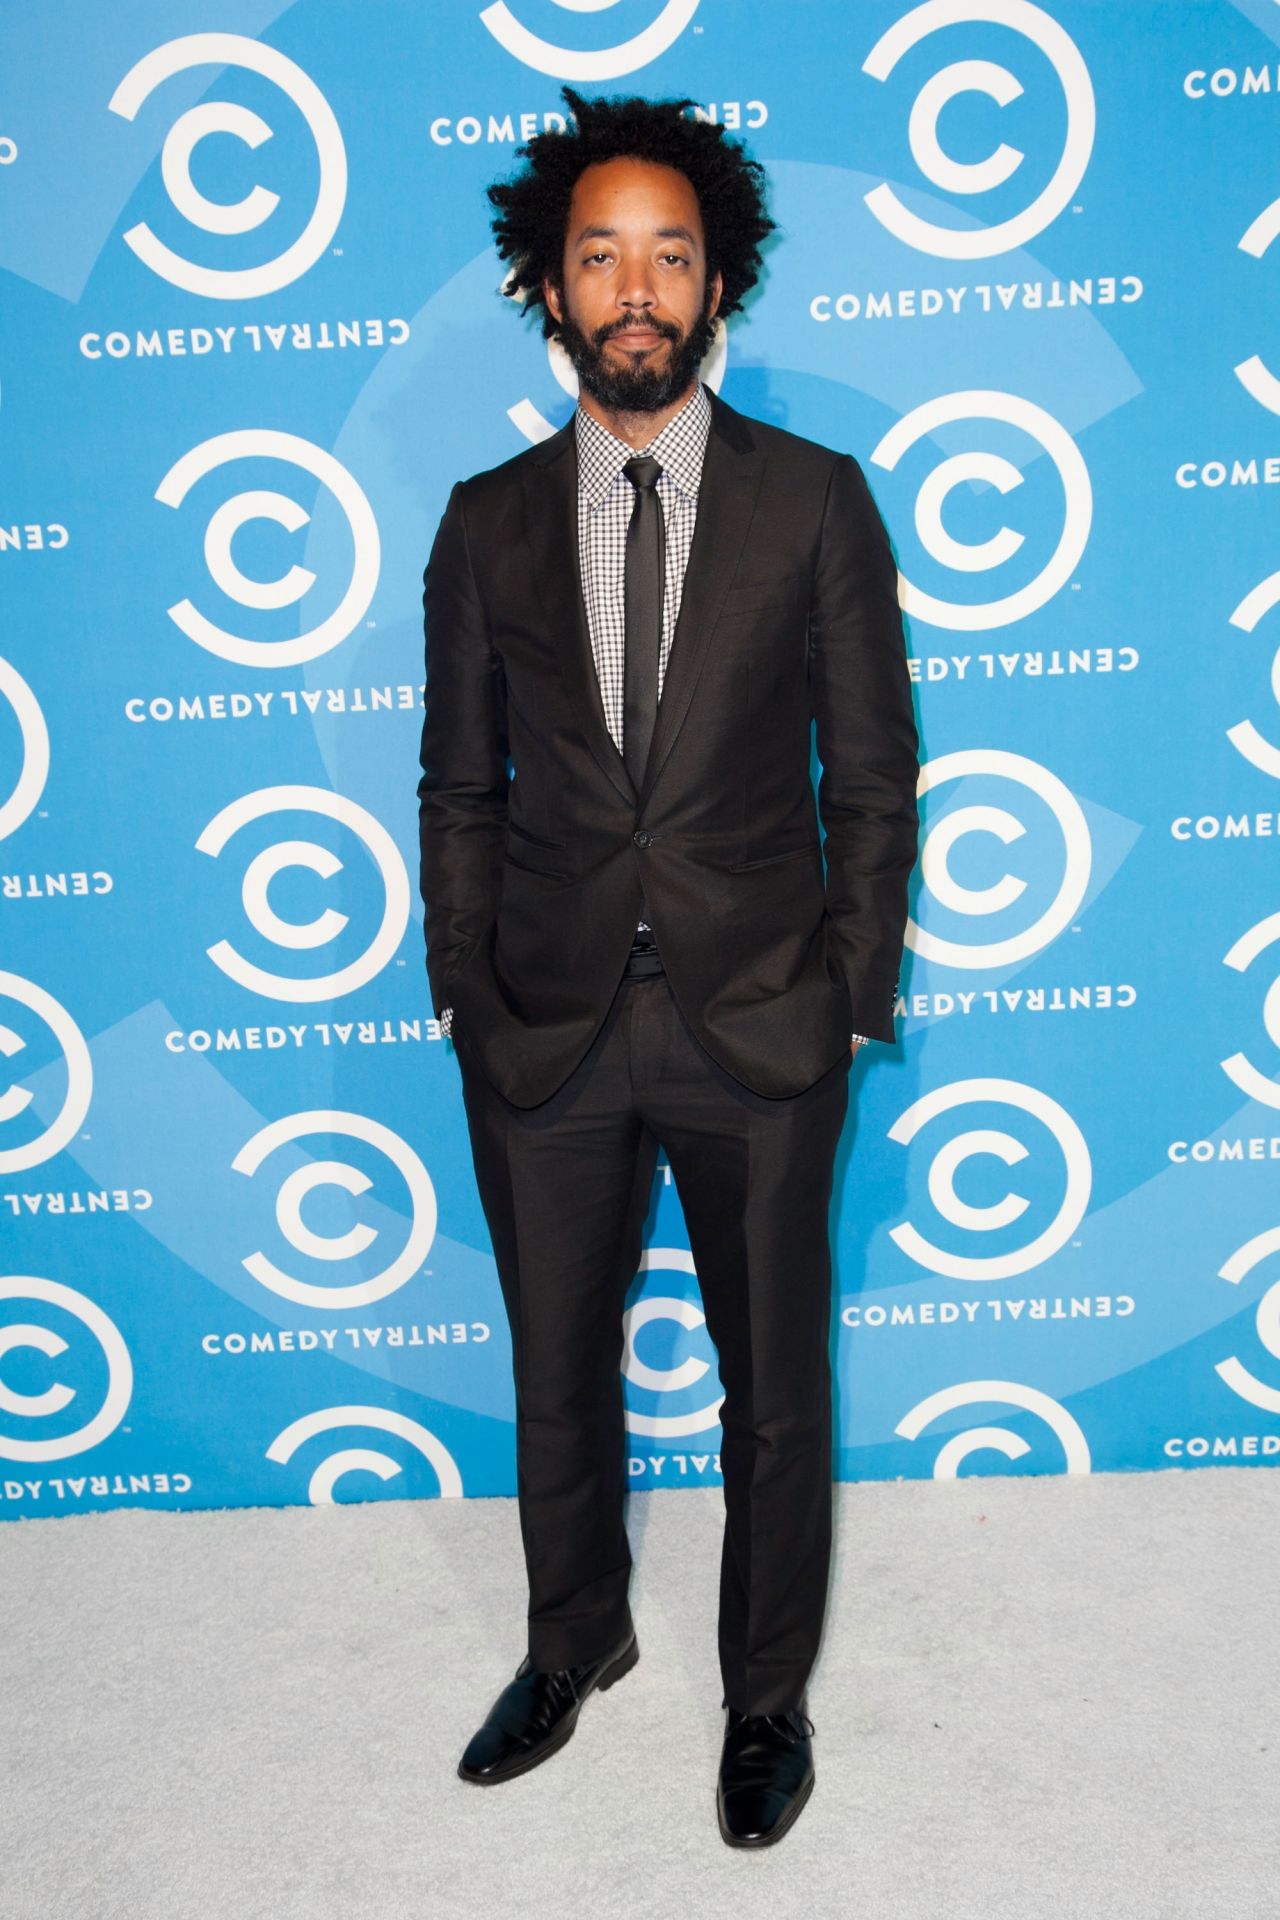 Writer/comedian Wyatt Cenac was a member of "The Daily Show" team both in front of and behind the camera for over four years, ending in 2012.